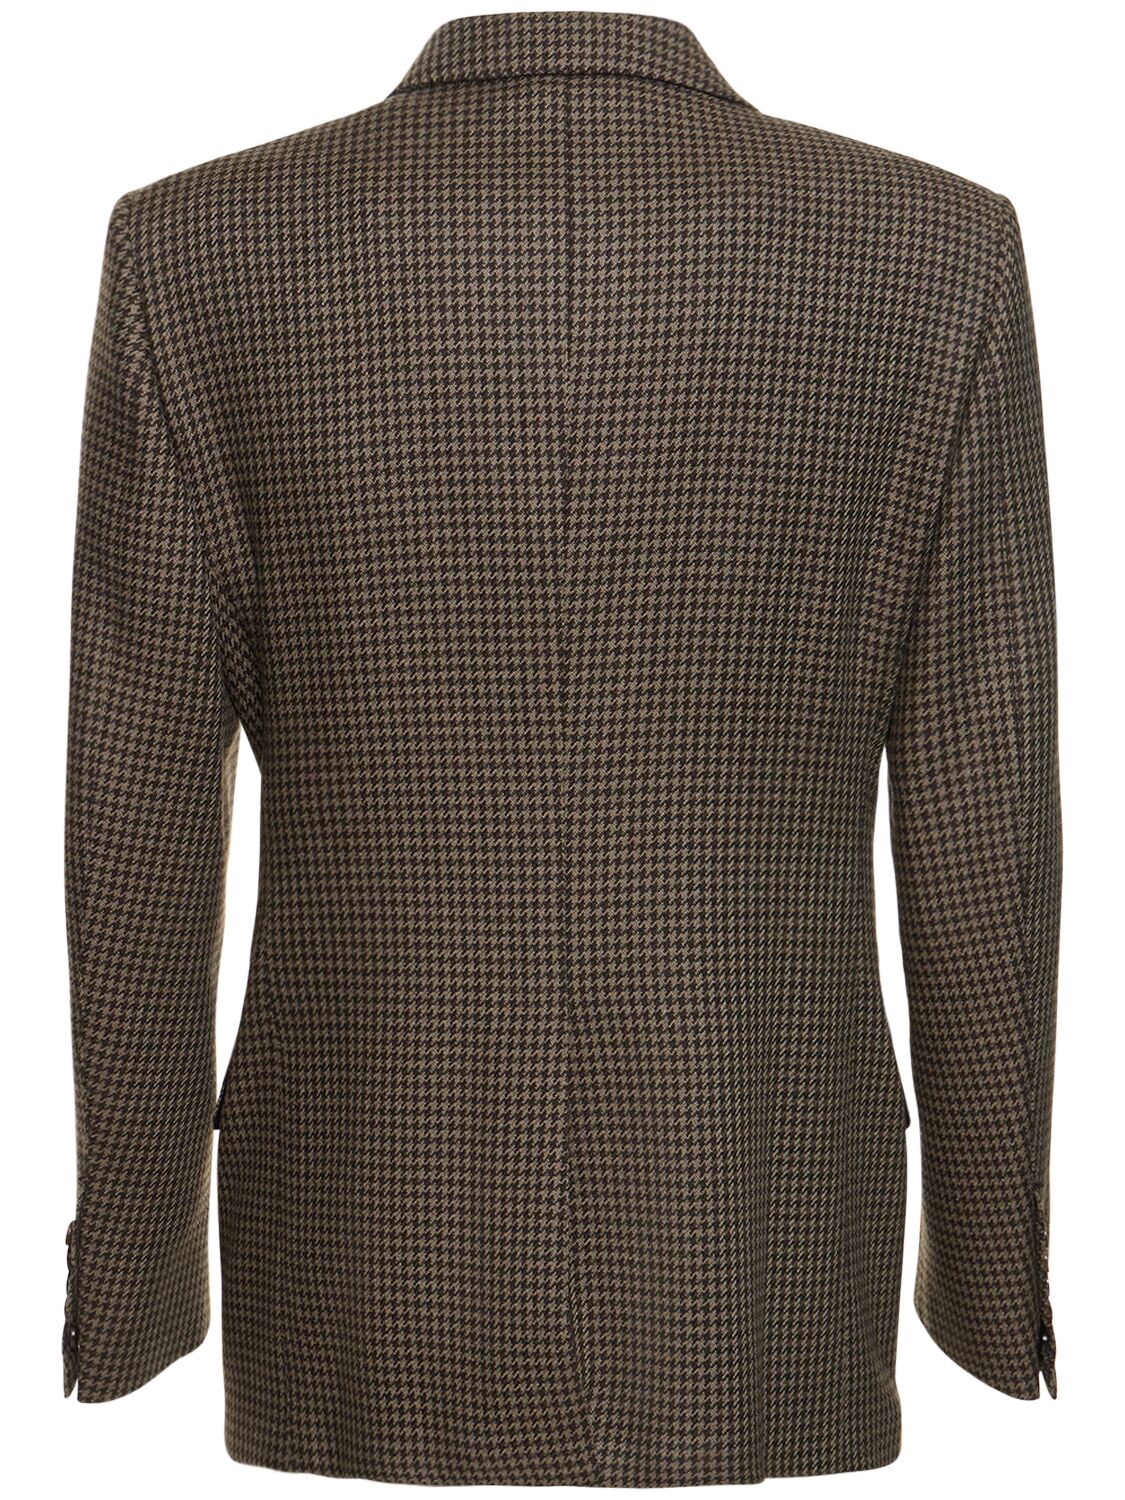 Shop Tom Ford Atticus Wool Houndstooth Jacket In Green,brown